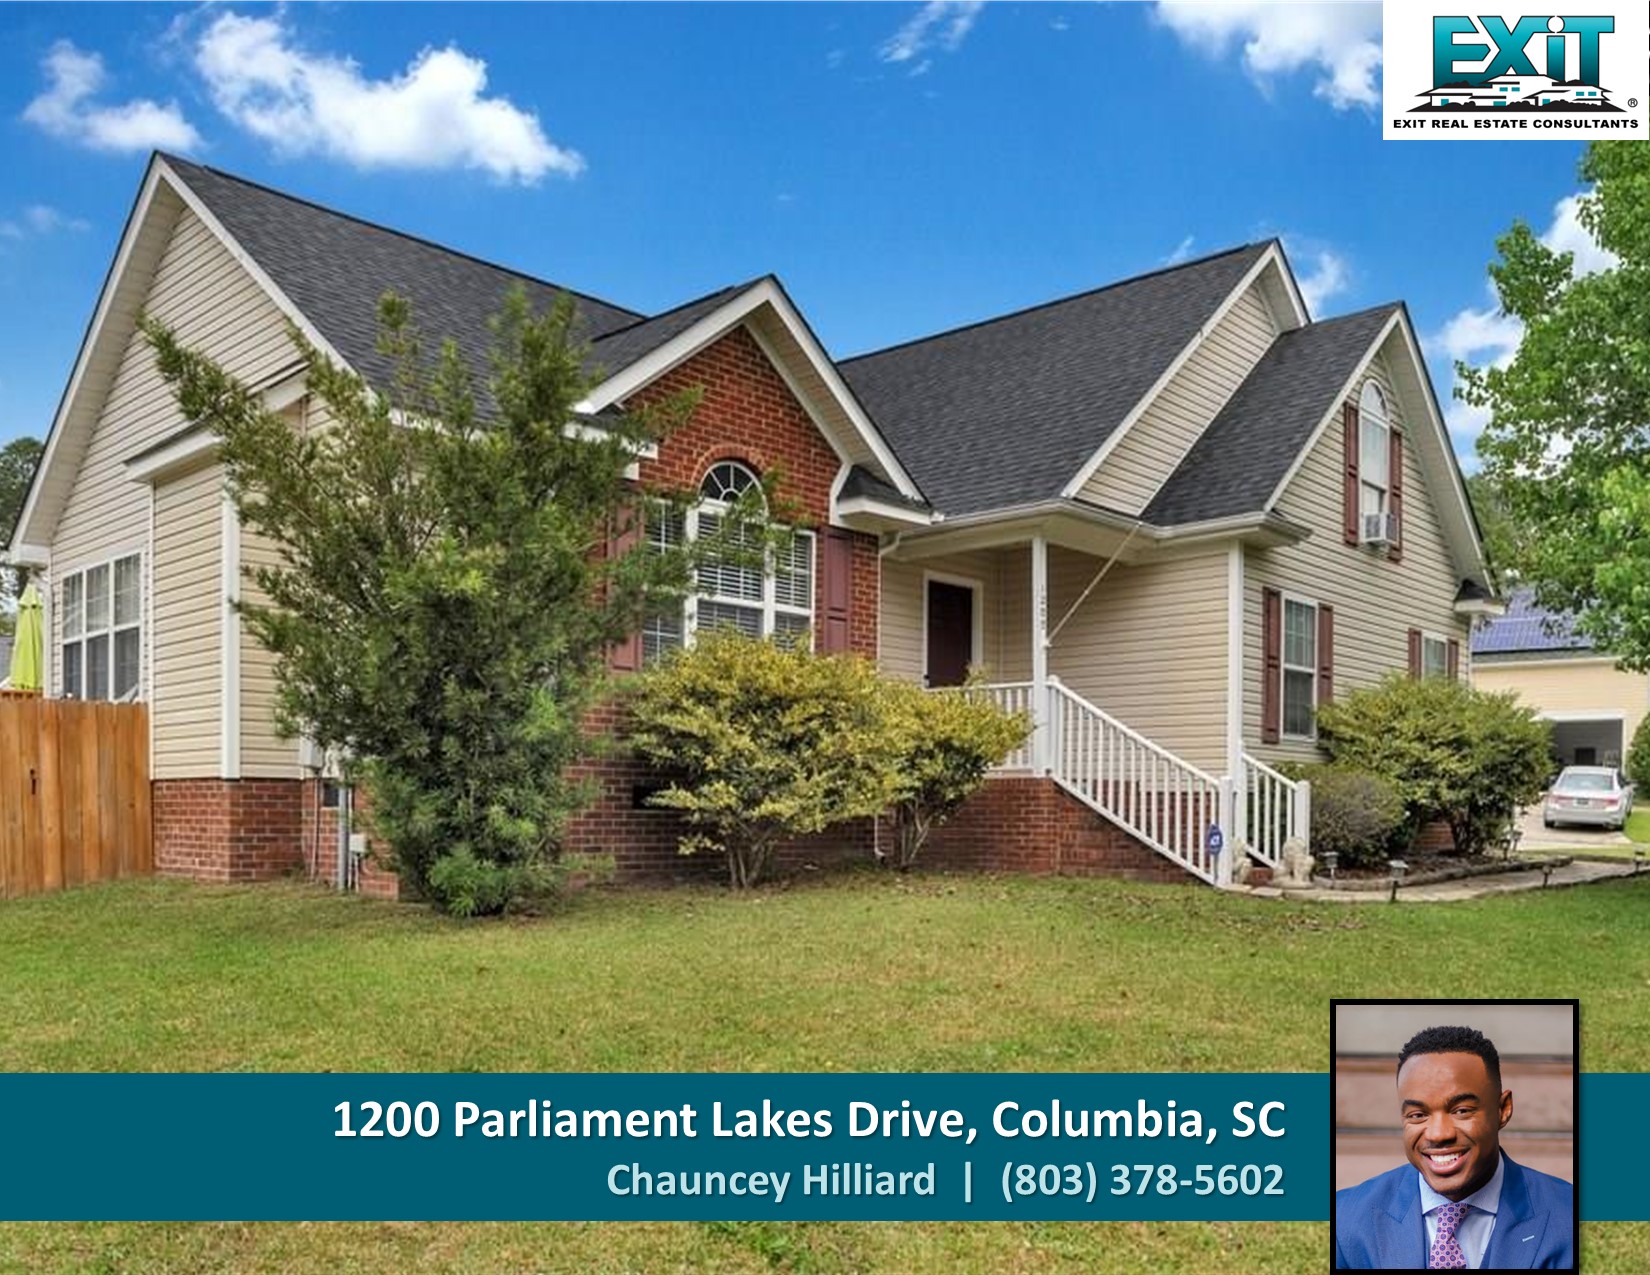 Just listed in Parliament Lakes